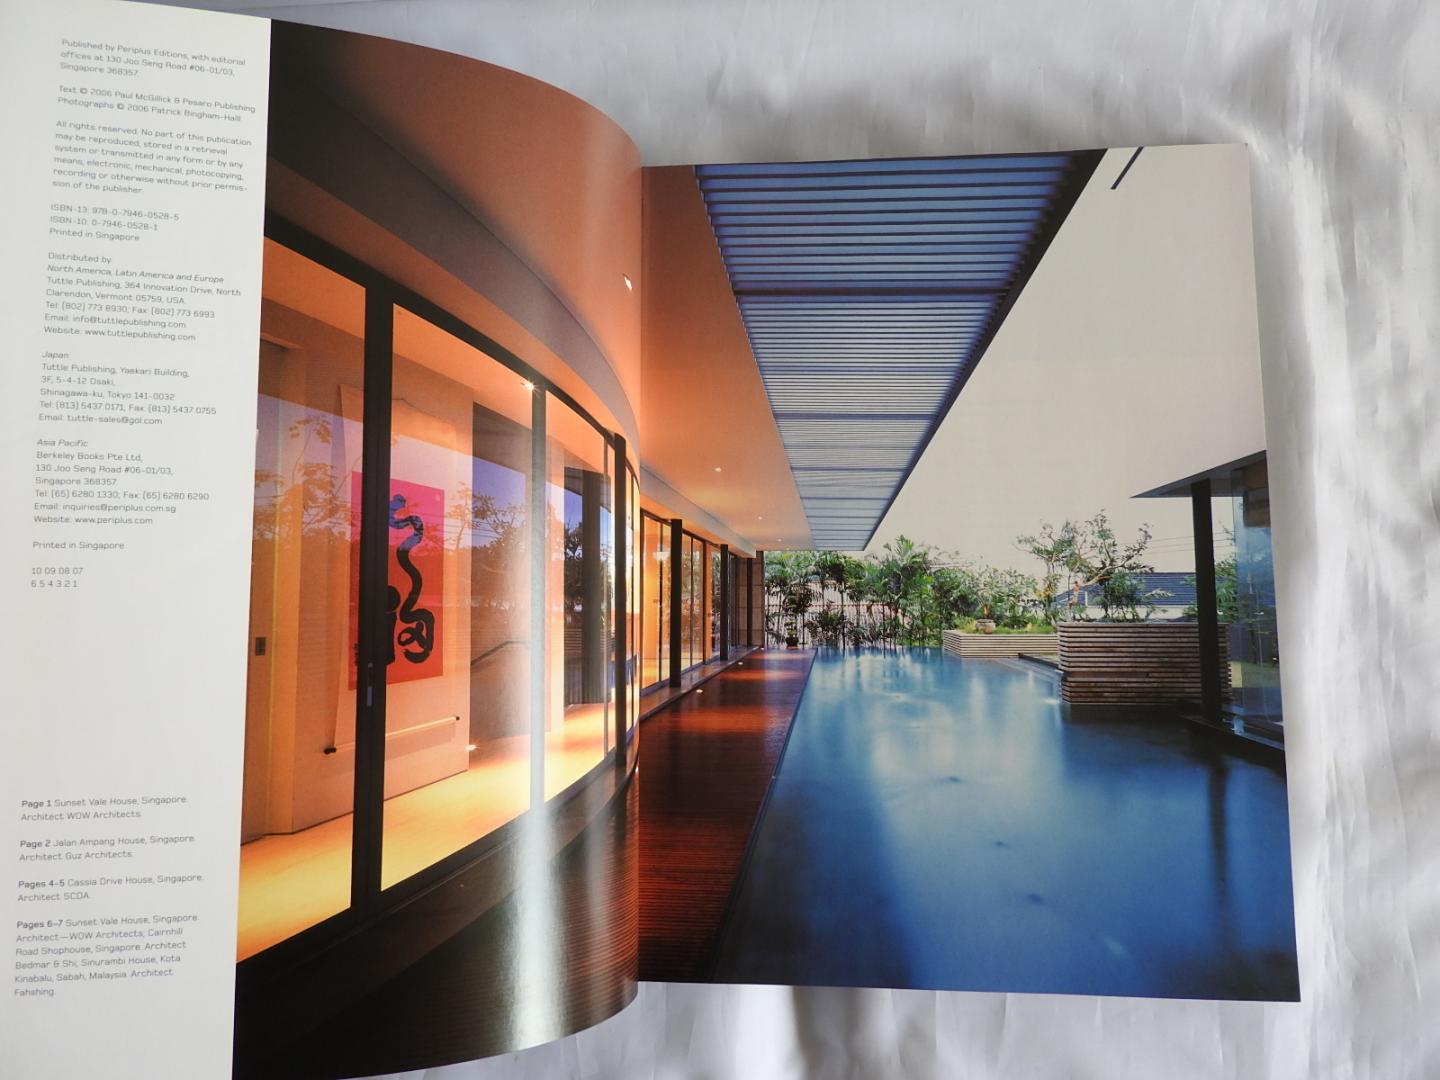 Paul McGillick  (Author), Patrick Bingham-Hall (Photographer) - 25 Tropical Houses in Singapore and Malaysia